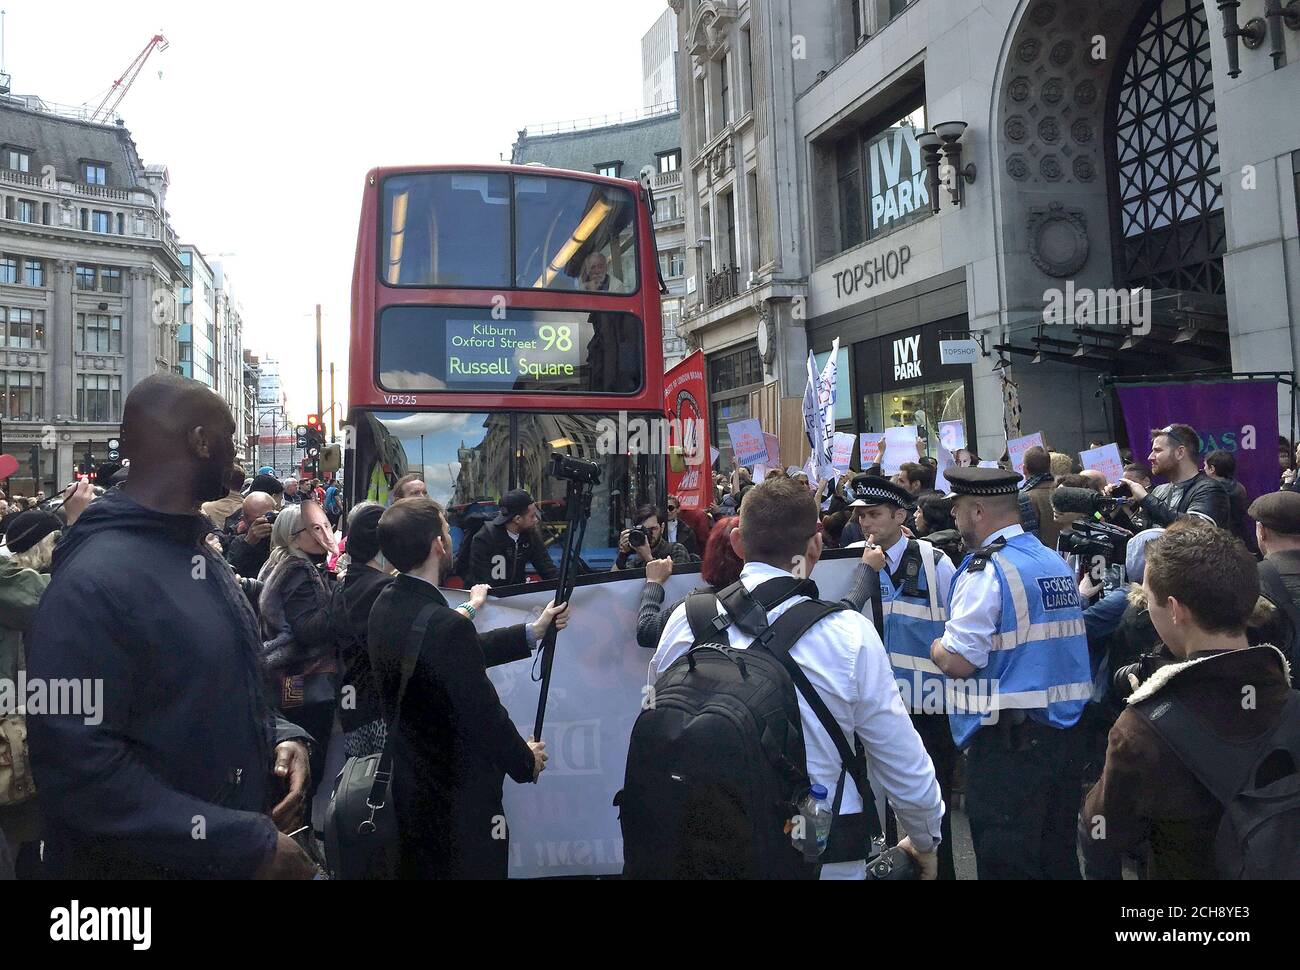 Protesters block traffic outside Topshop in Oxford street, London in a demonstration against Topshop owner Sir Philip Green. Stock Photo